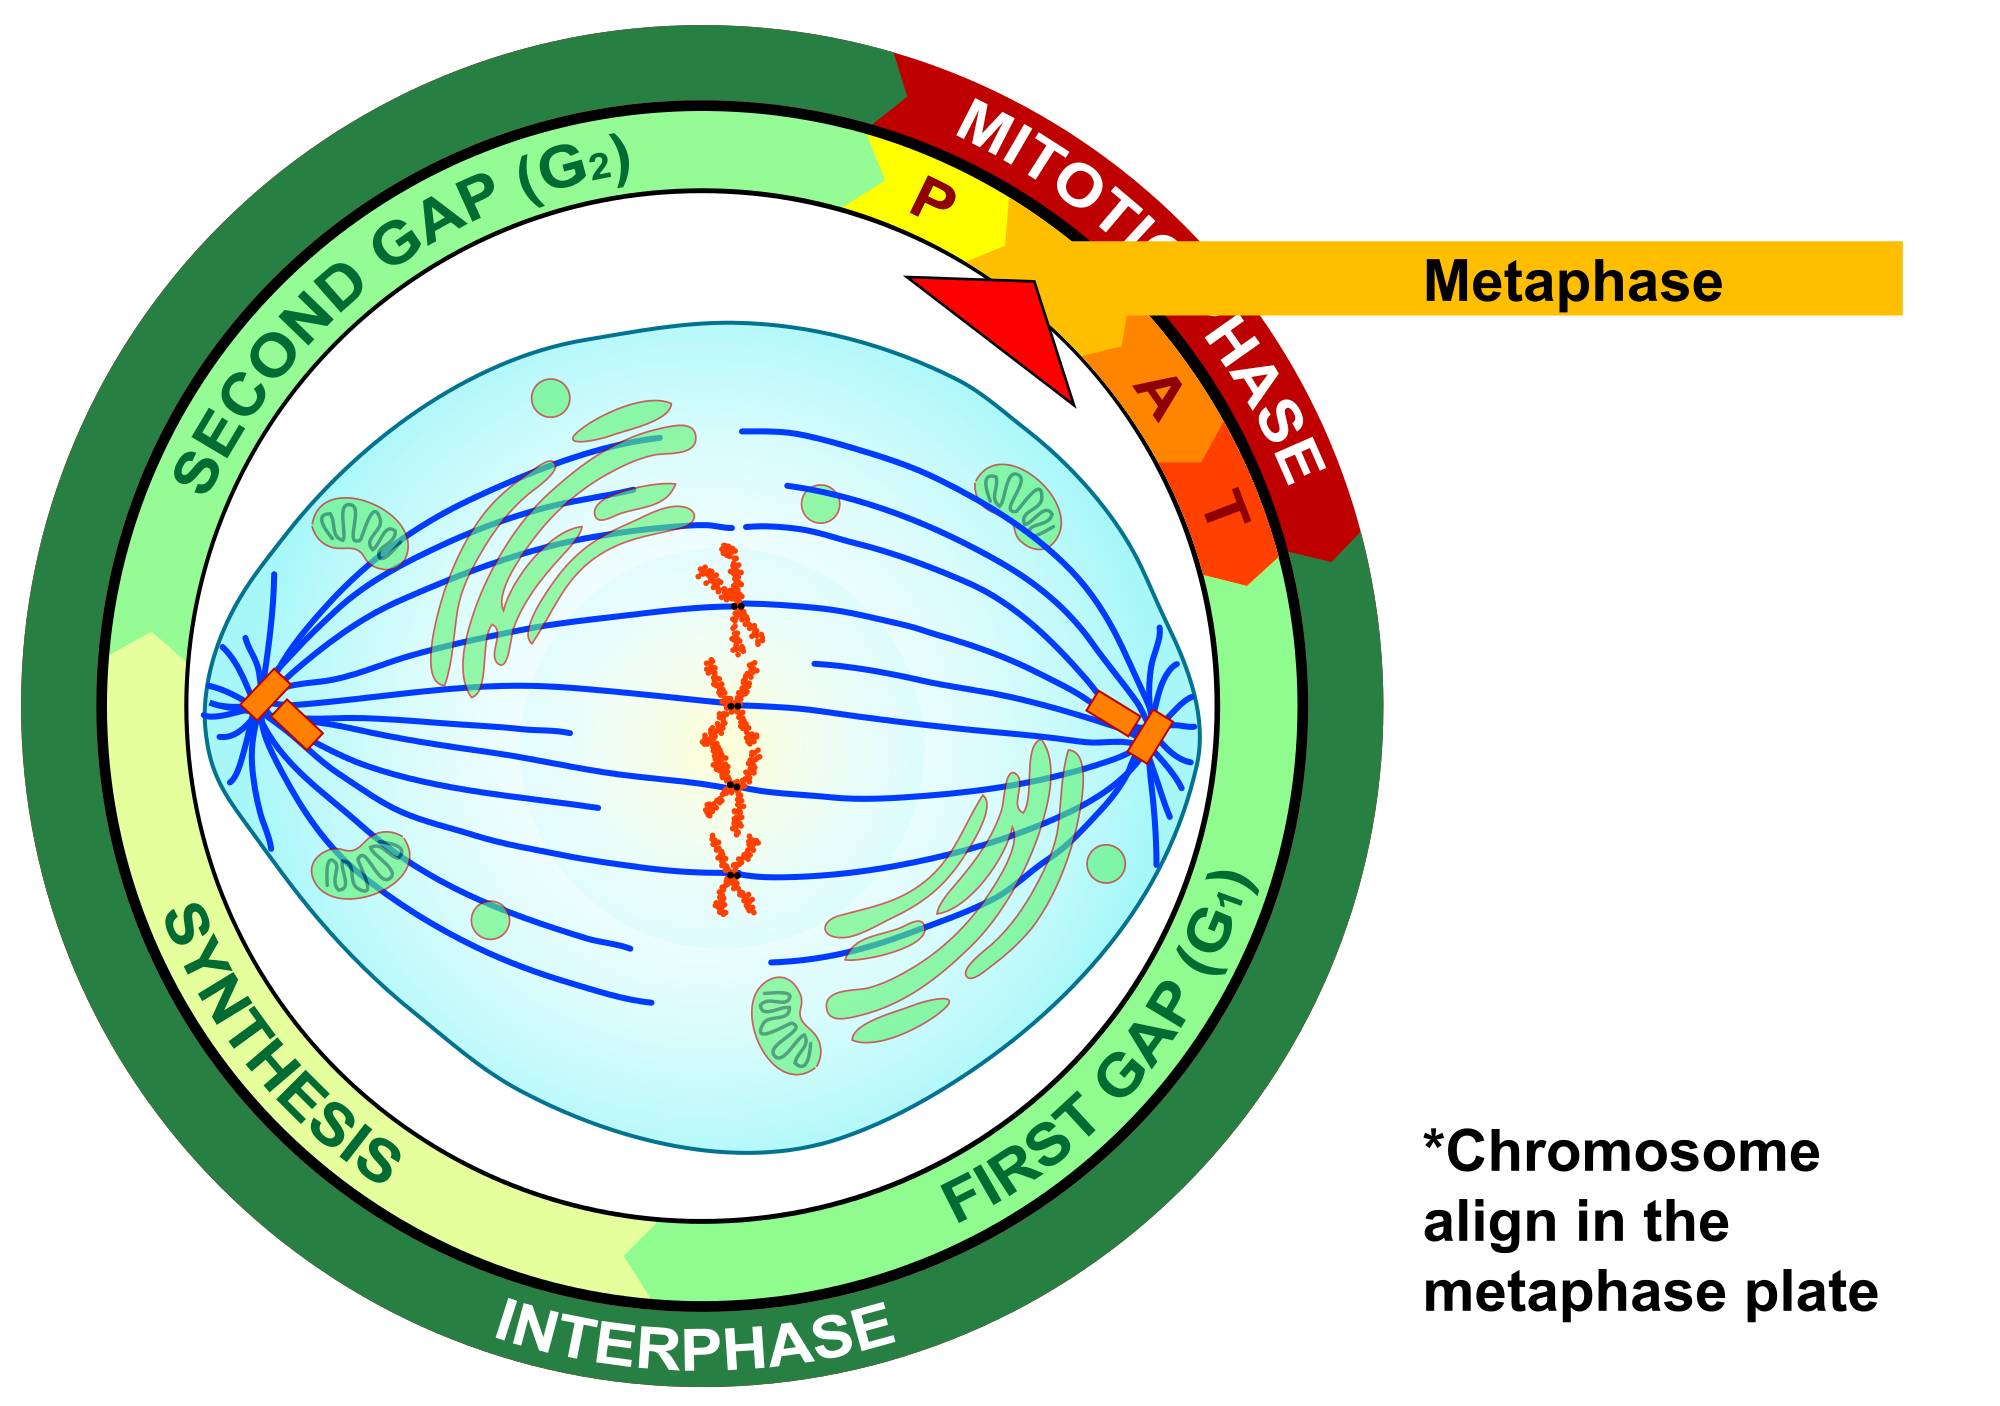 Diagram shows metaphase of mitosis, in which the spindle fibers are fully formed and the chromosomes are aligned along the center of the cell.